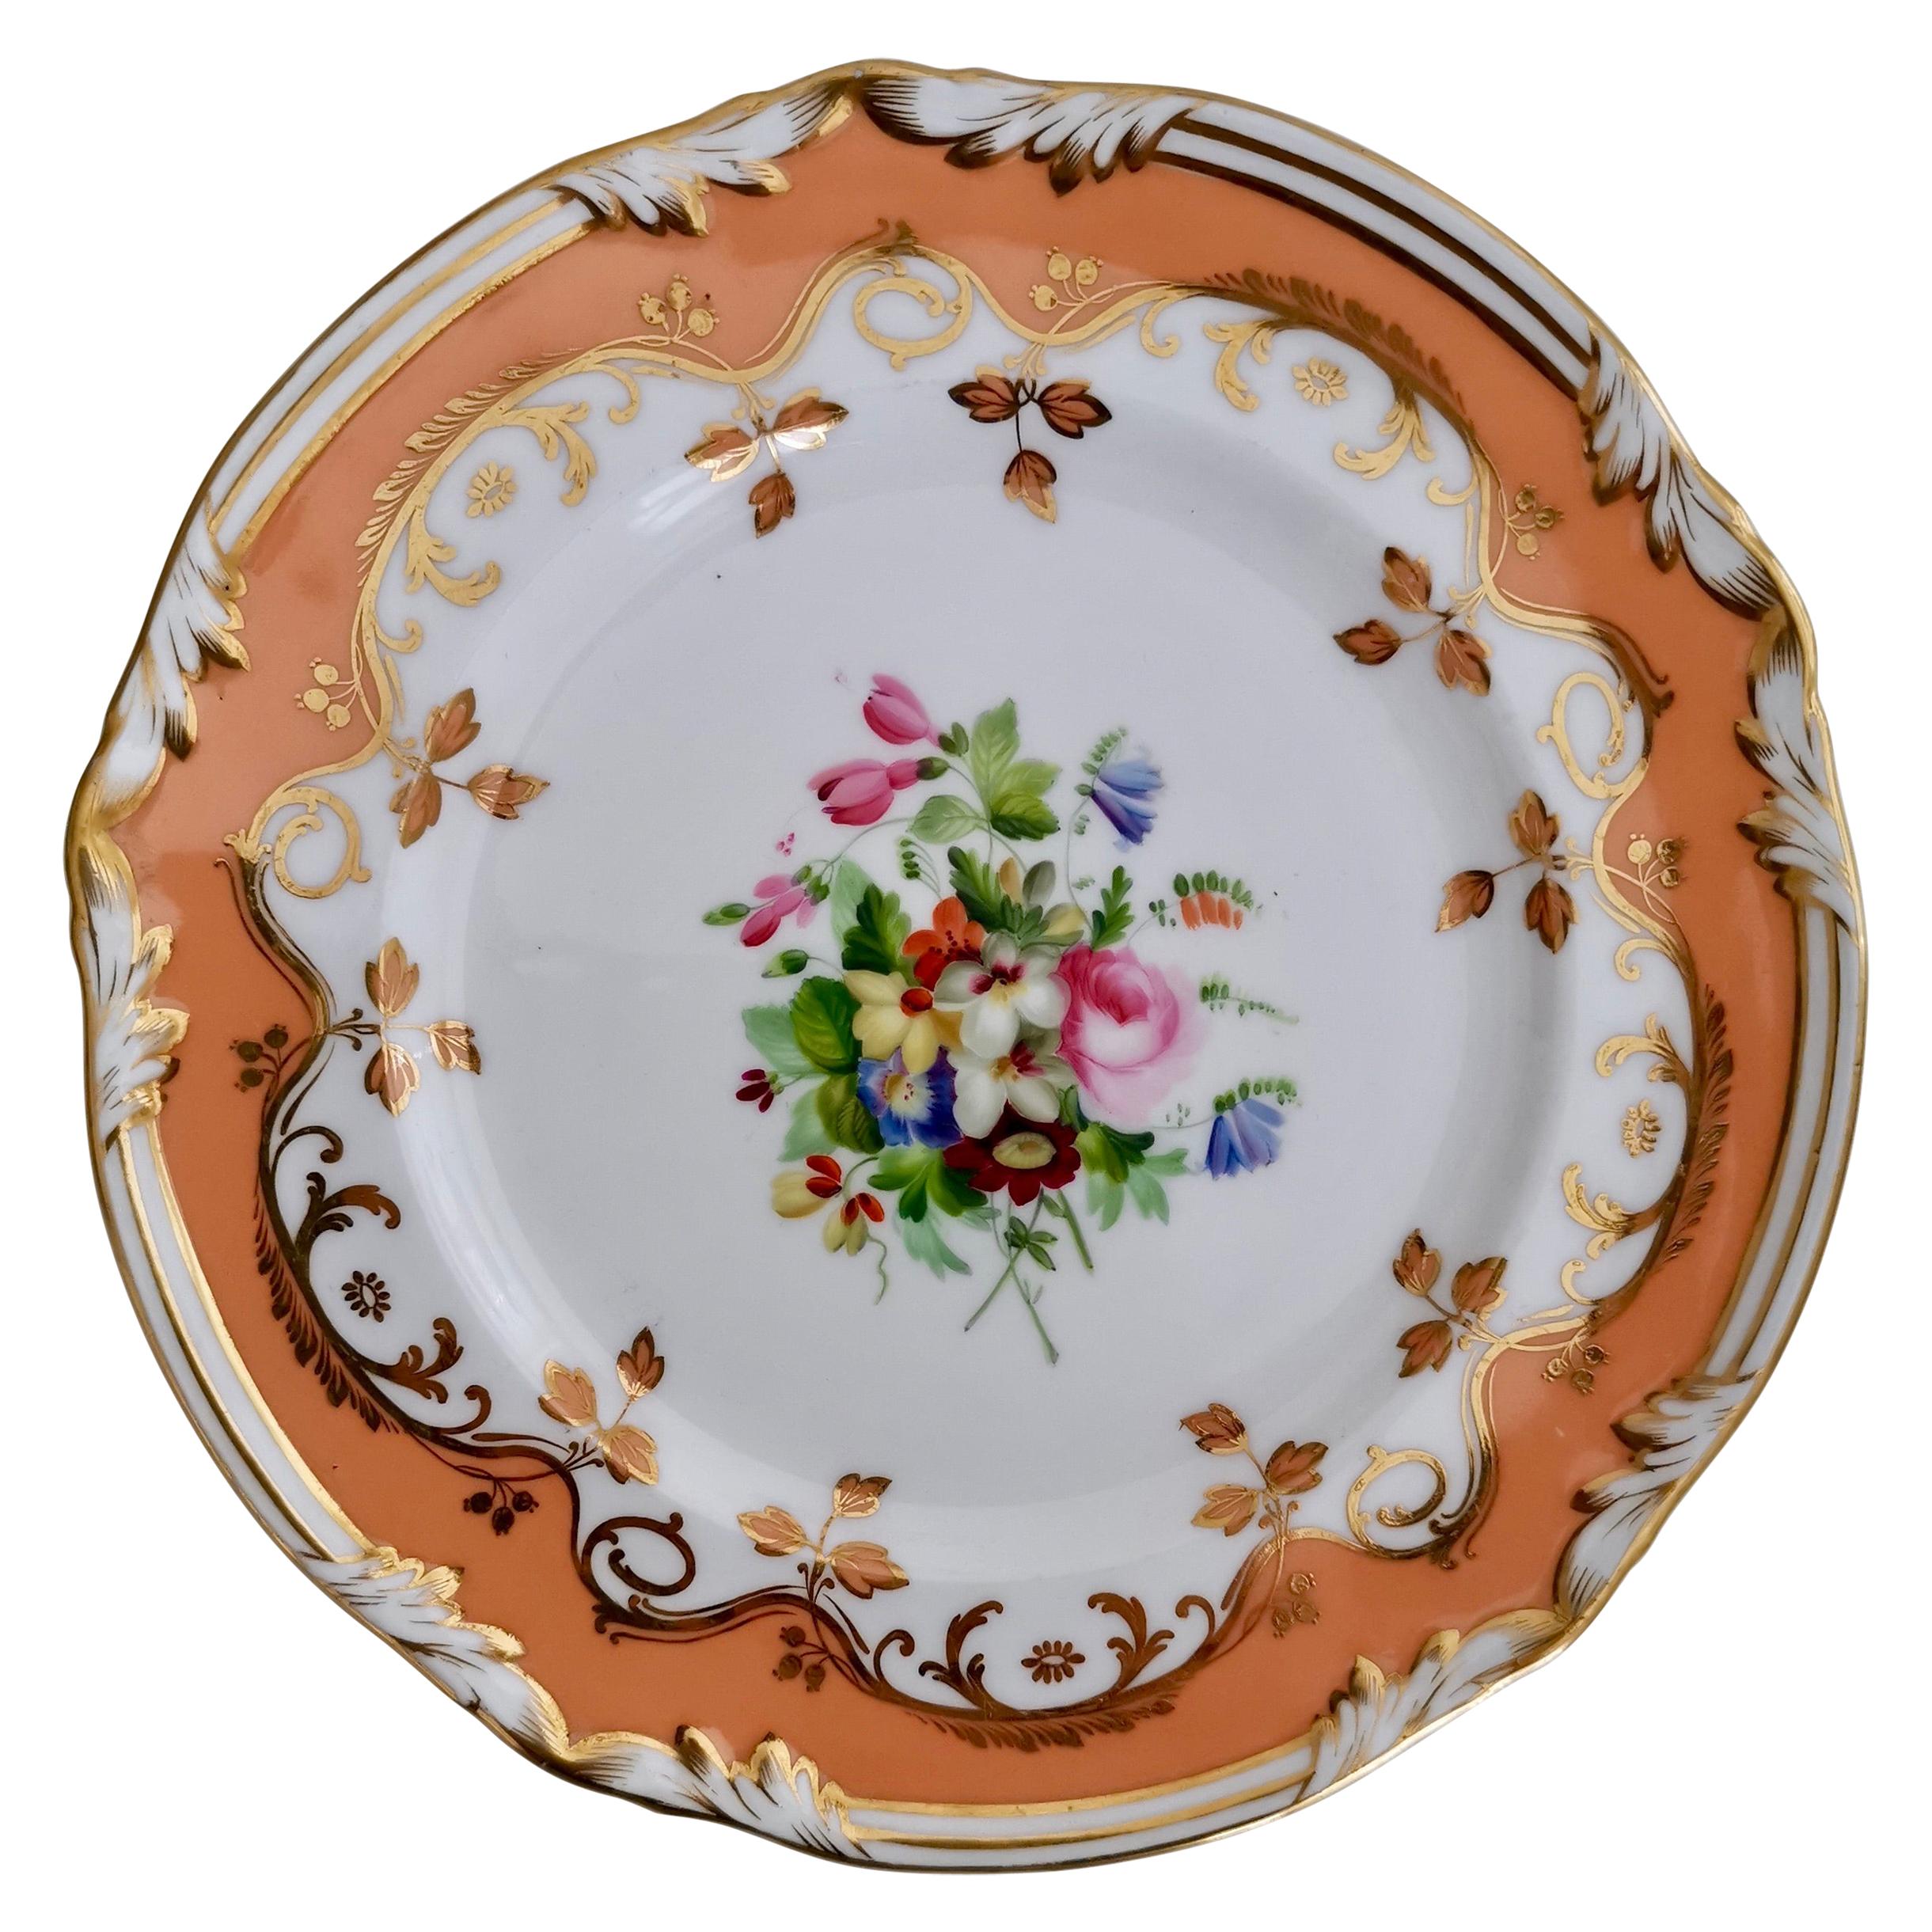 Coalport Porcelain Plate, Peach Ground and Flowers by Thomas Dixon, '1'